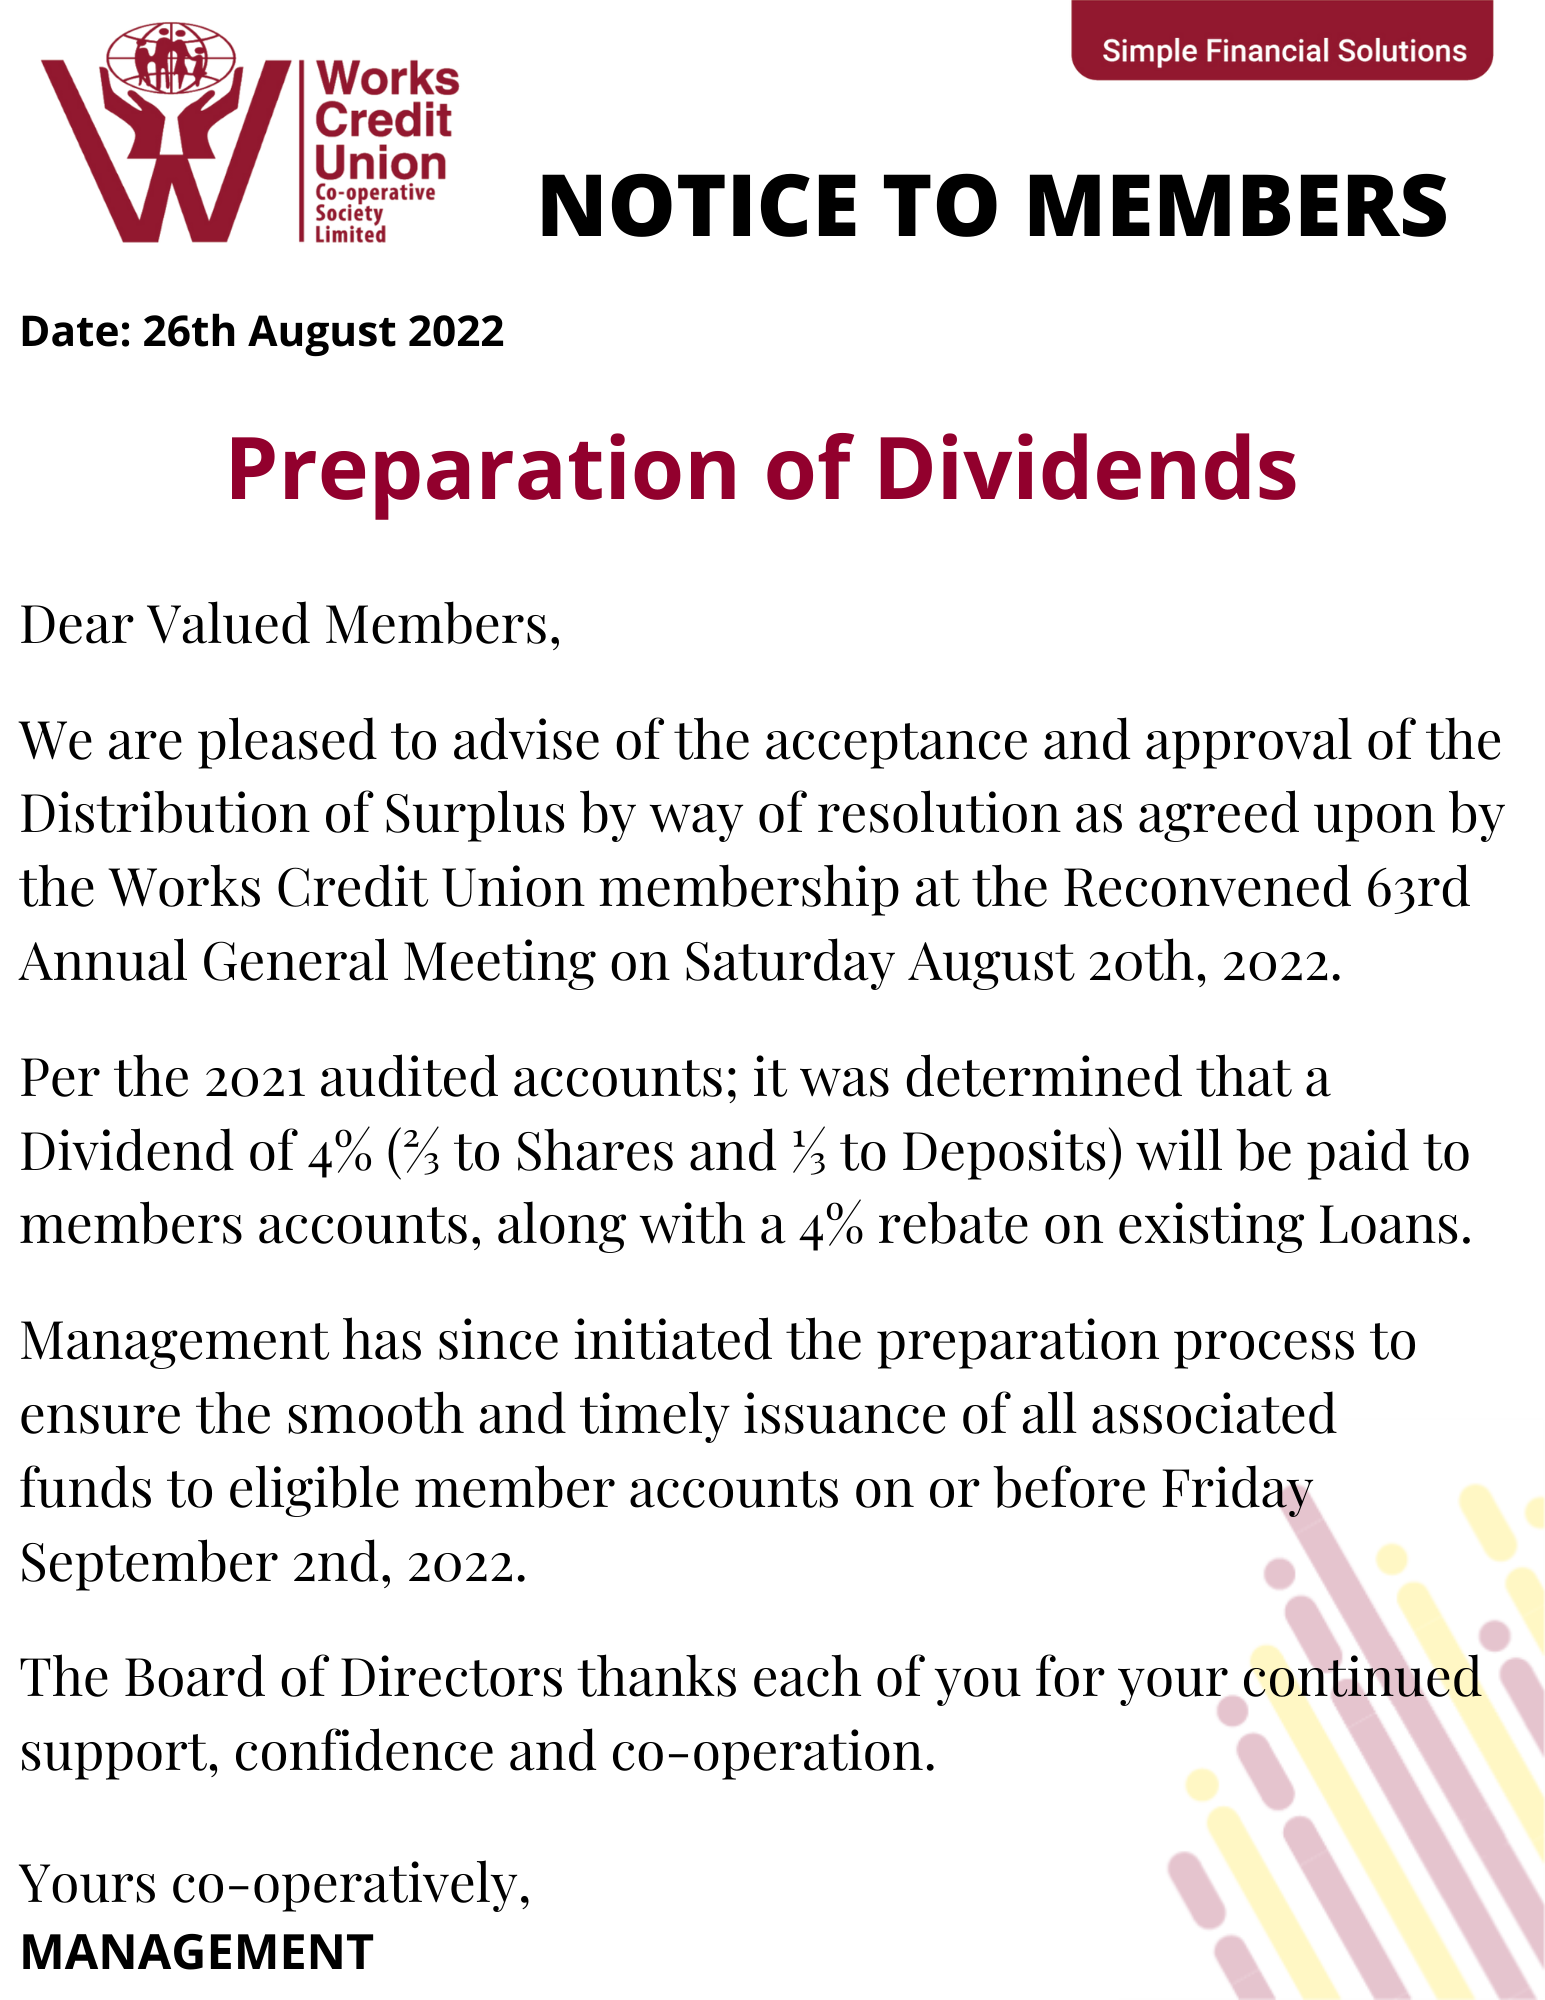 Notice re Preparation of Dividends - Approved.png